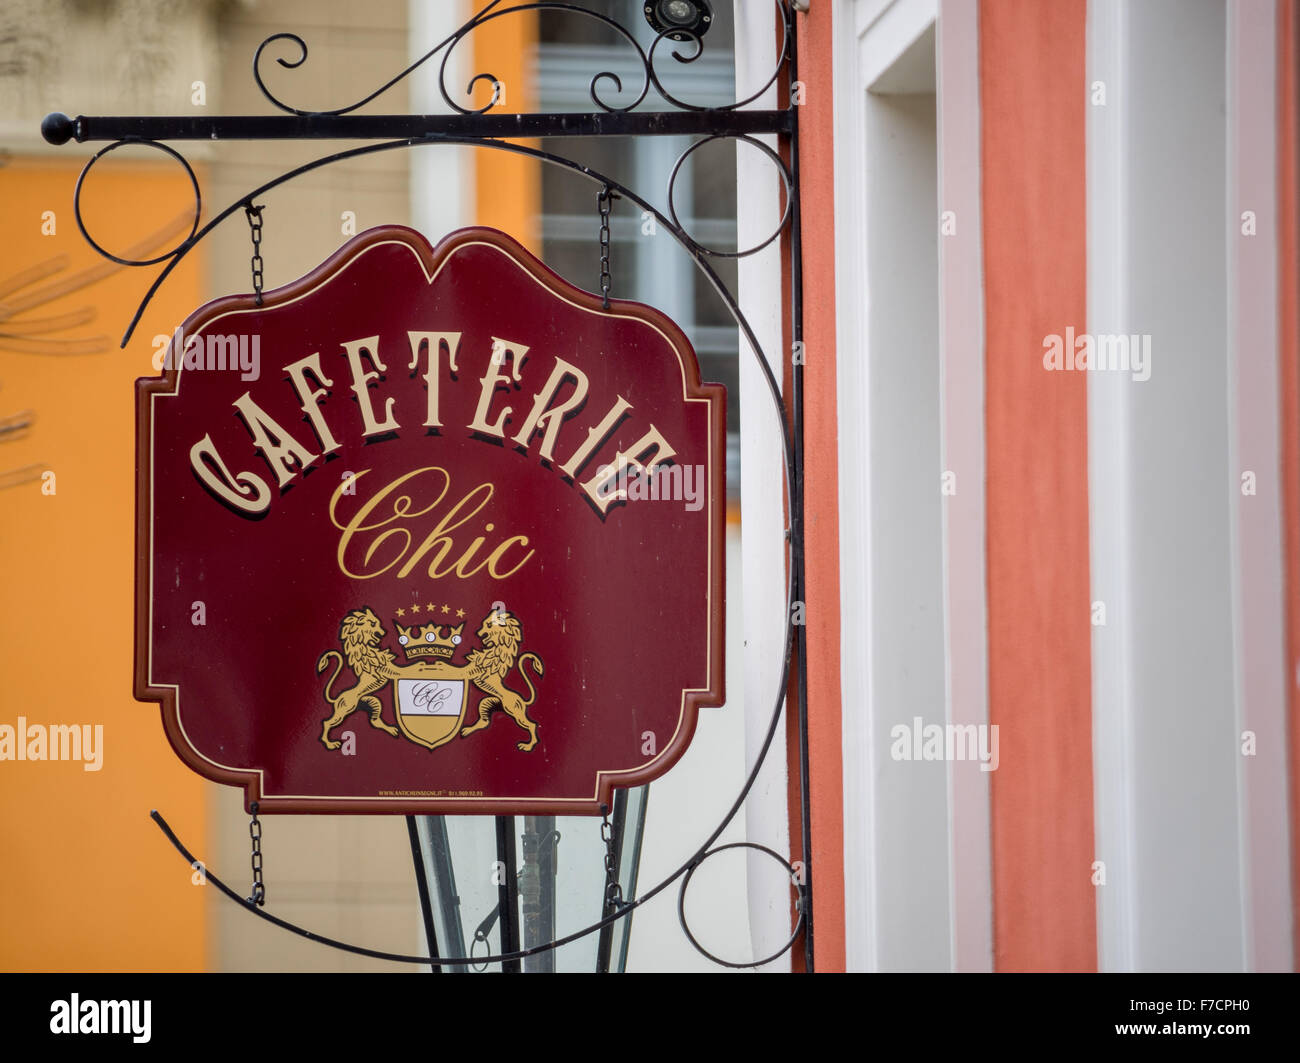 Signs of Cafeterie Chic Ostrow Tumski Wroclaw Stock Photo